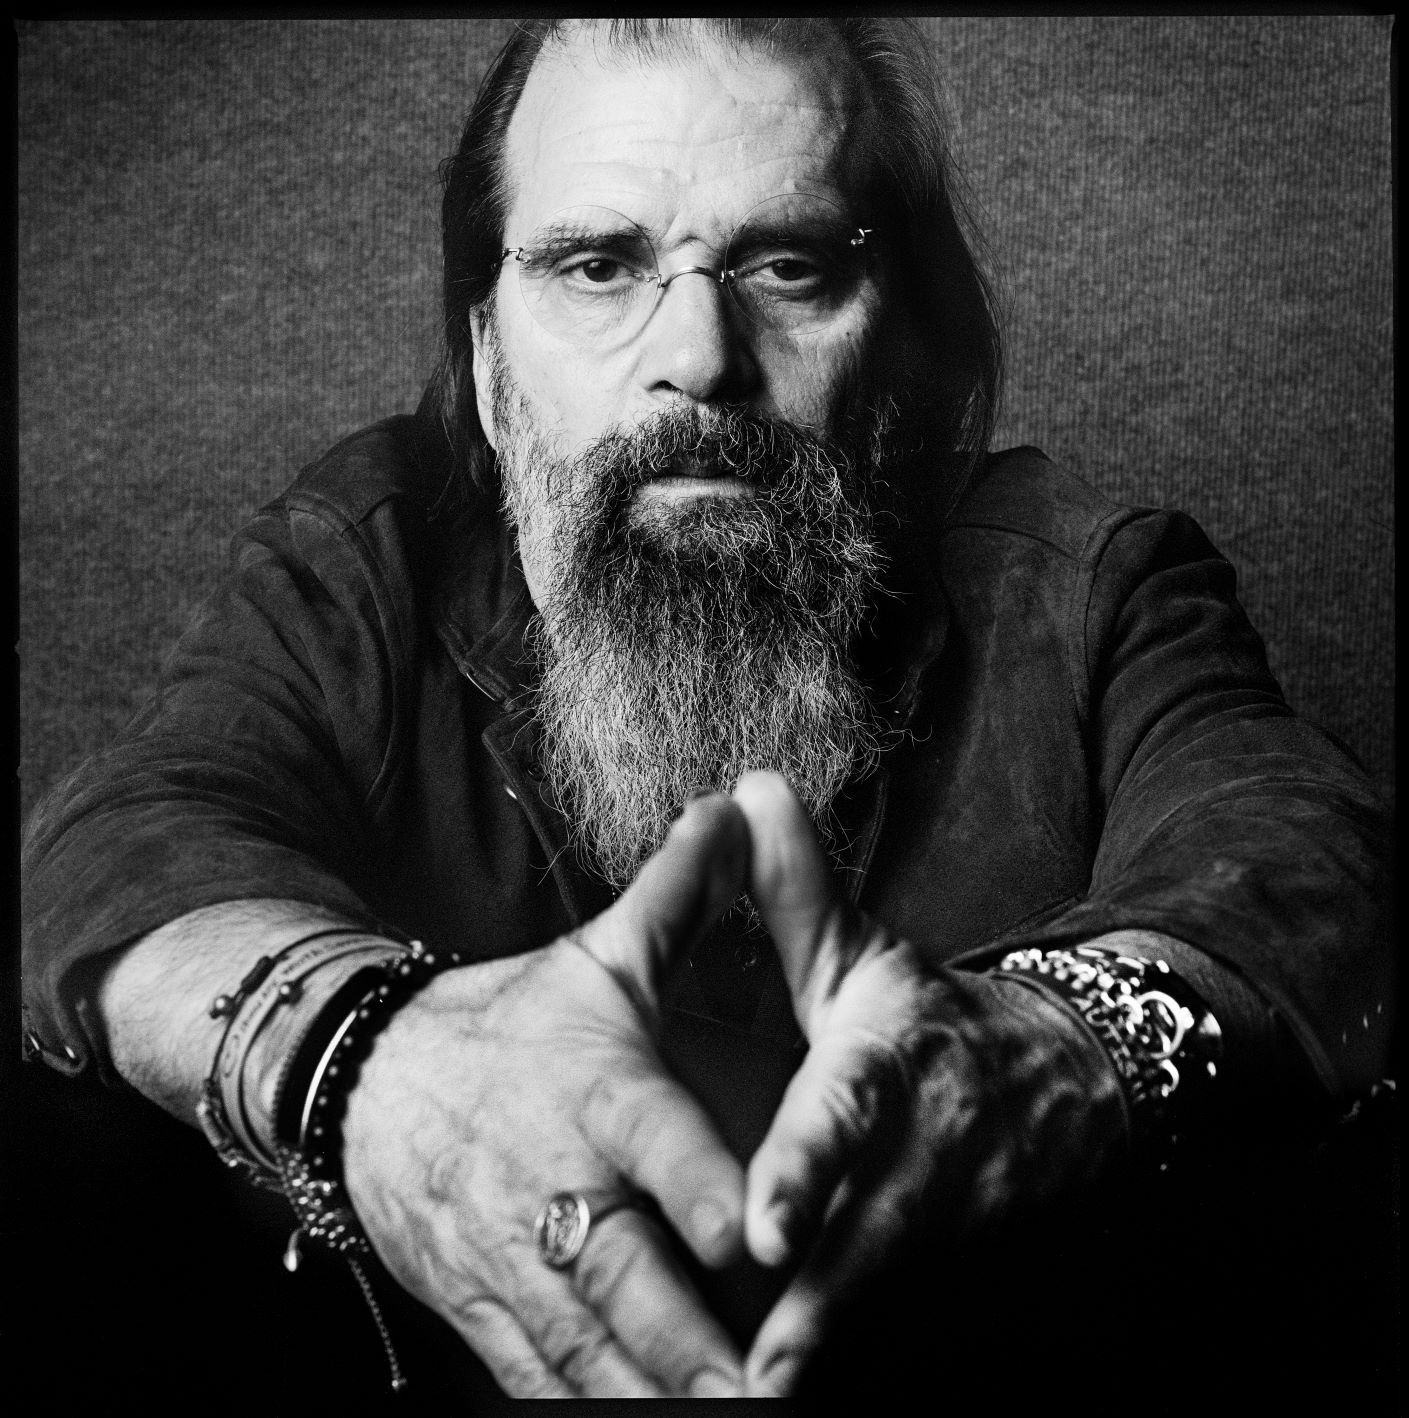 Steve Earle-Solo Acoustic (Florence Dore opening)